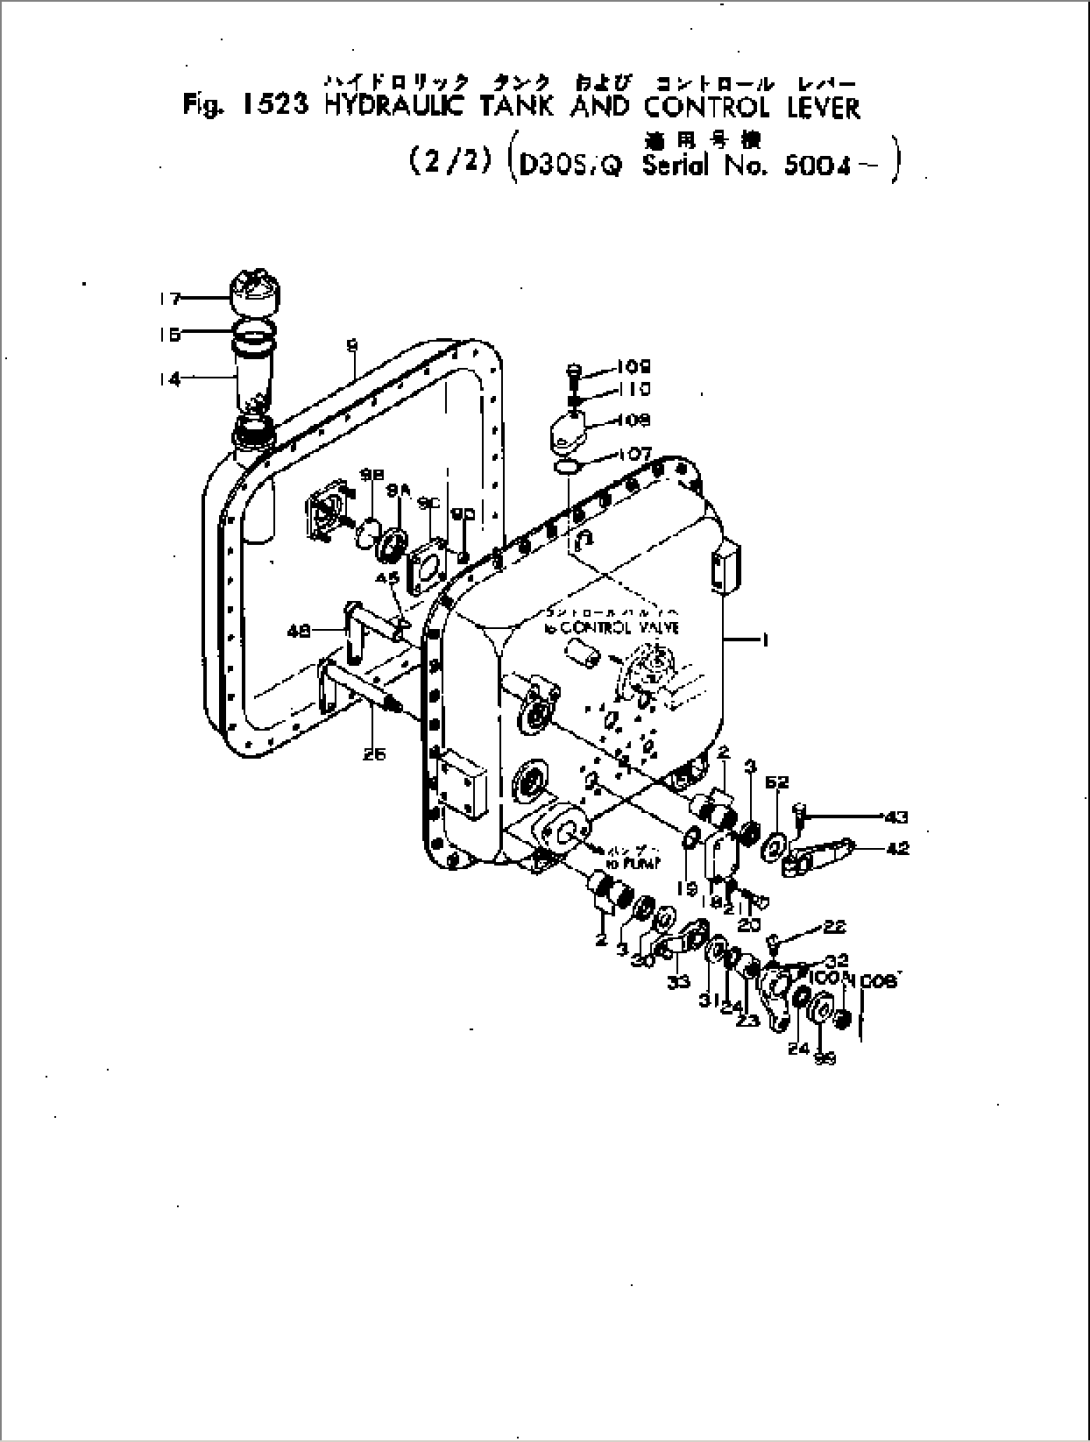 HYDRAULIC TANK AND CONTROL LEVER (2/2)